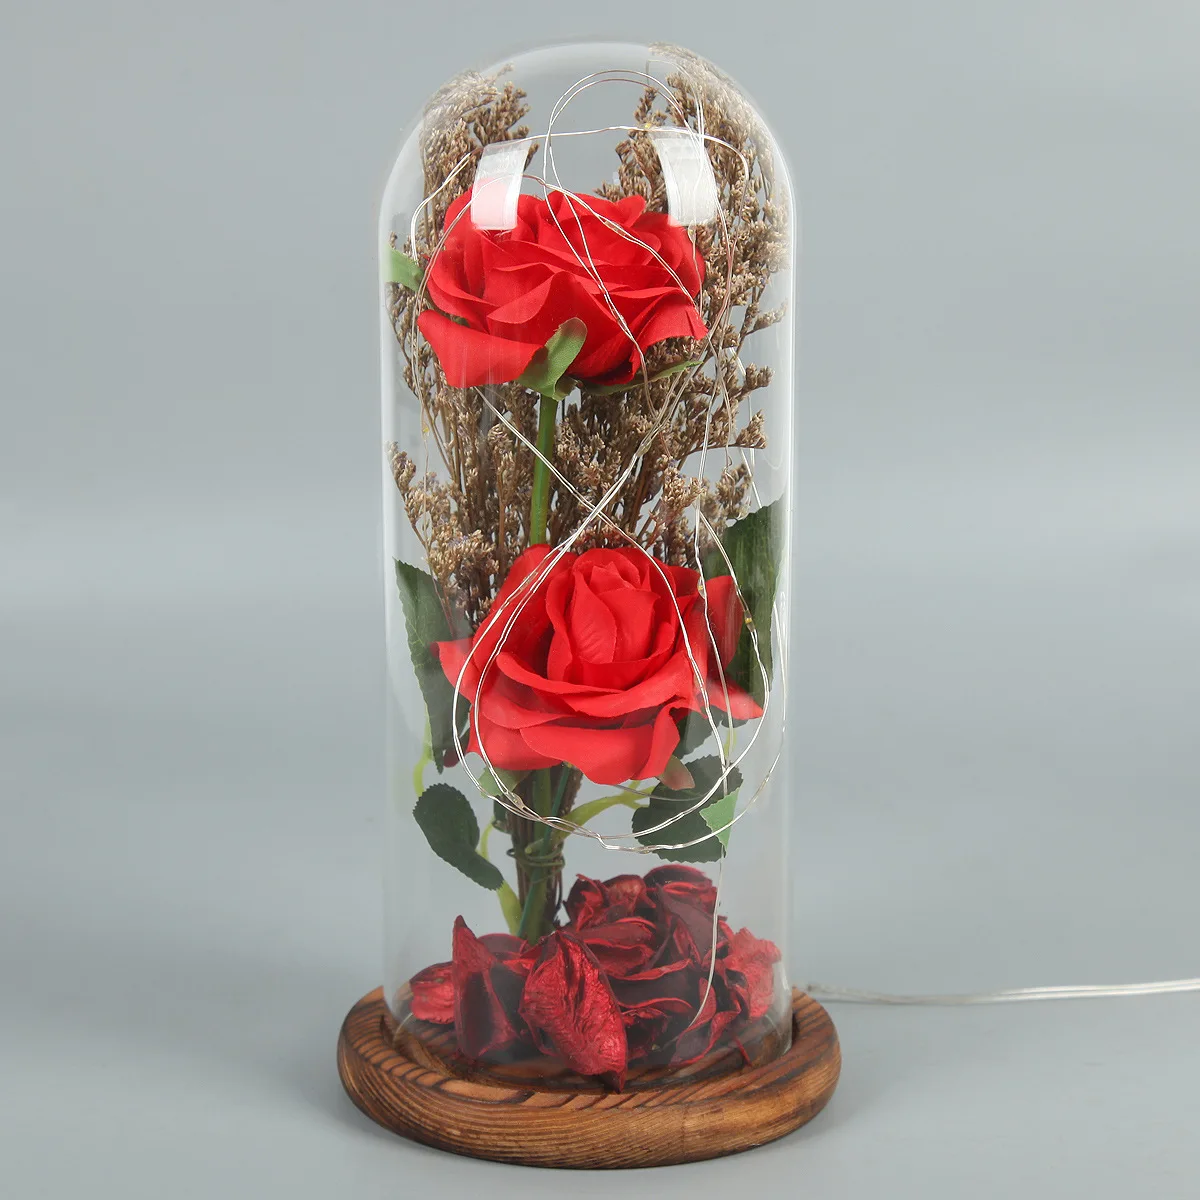 

Romantic Gift Preserved Rose Beauty Rose In Glass Dome Forever Red Rose, Preserved Rose, Belle Rose Special For You